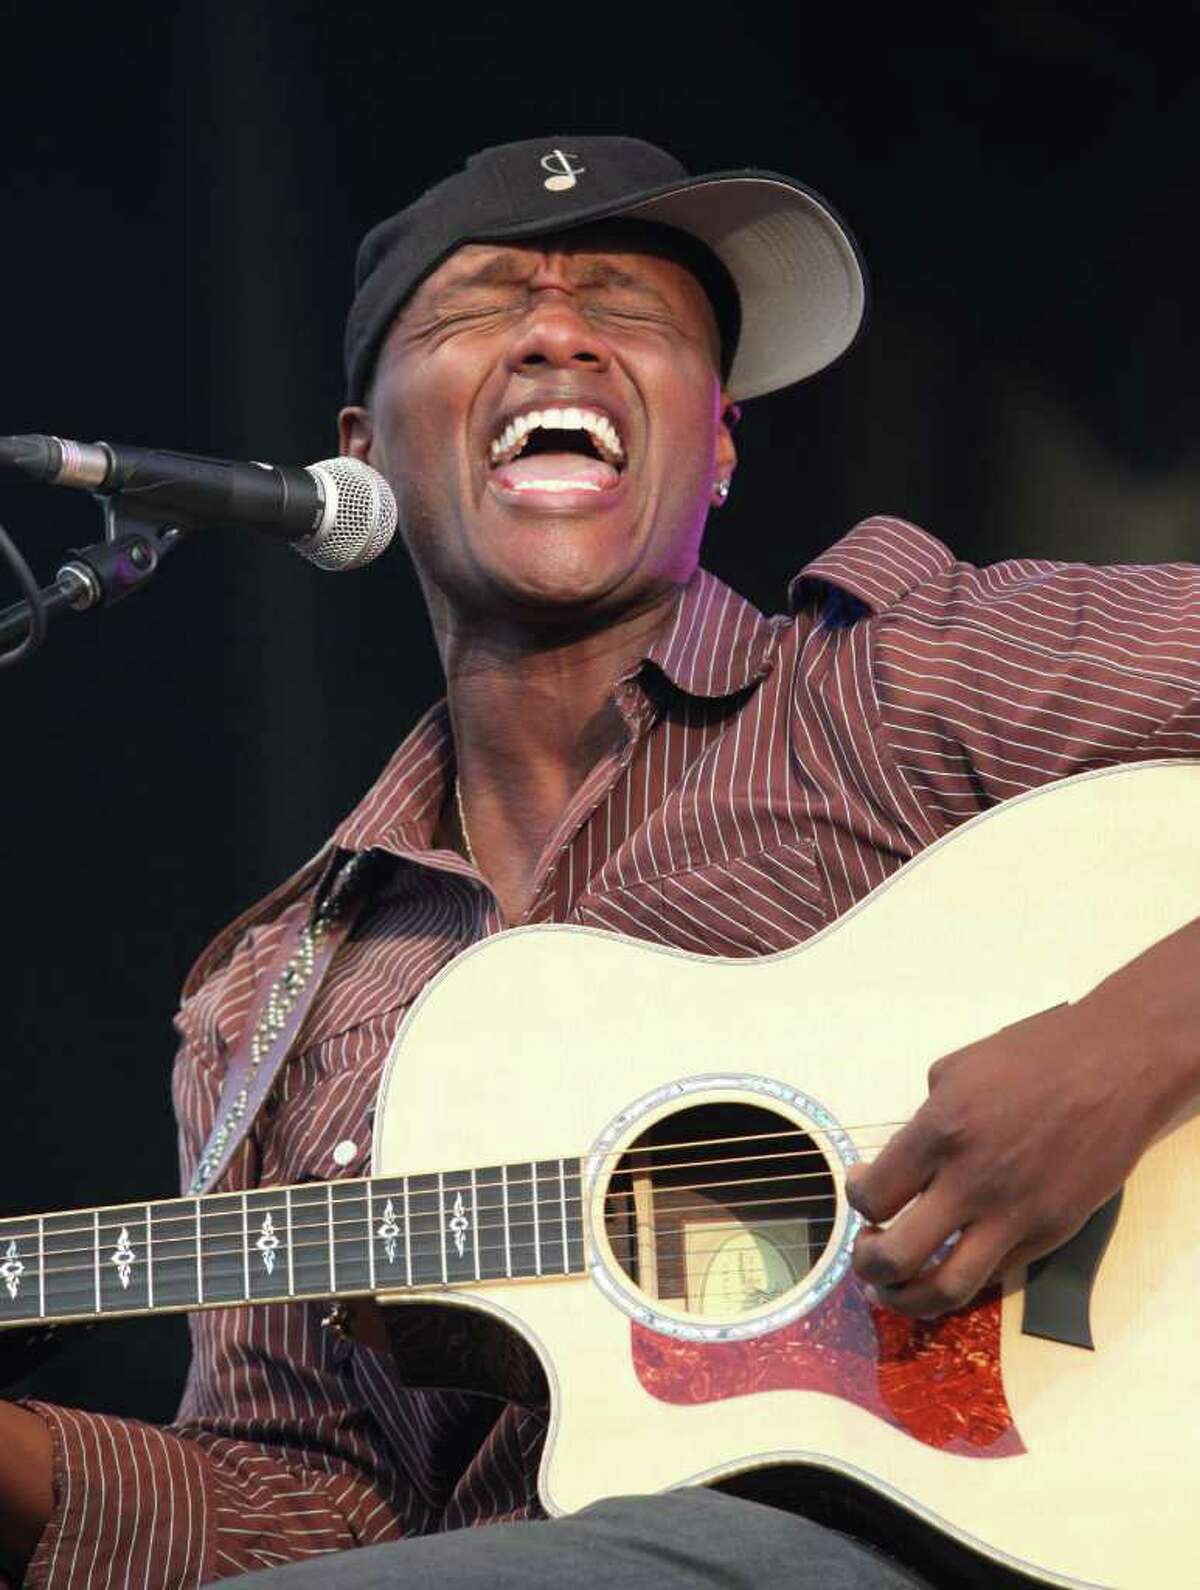 Javier Colon, winner of the NBC reality talent show "The Voice," performs at the Cisco Ottawa Bluesfest on Tuesday, July 5, 2011. Colon will appear before fans at a homecoming celebration at his alma mater, Bunnell High School in Stratford, Conn. on Sunday July 10. (The Canadian Press Images PHOTO/Ottawa Bluesfest/Patrick Doyle via AP Images)